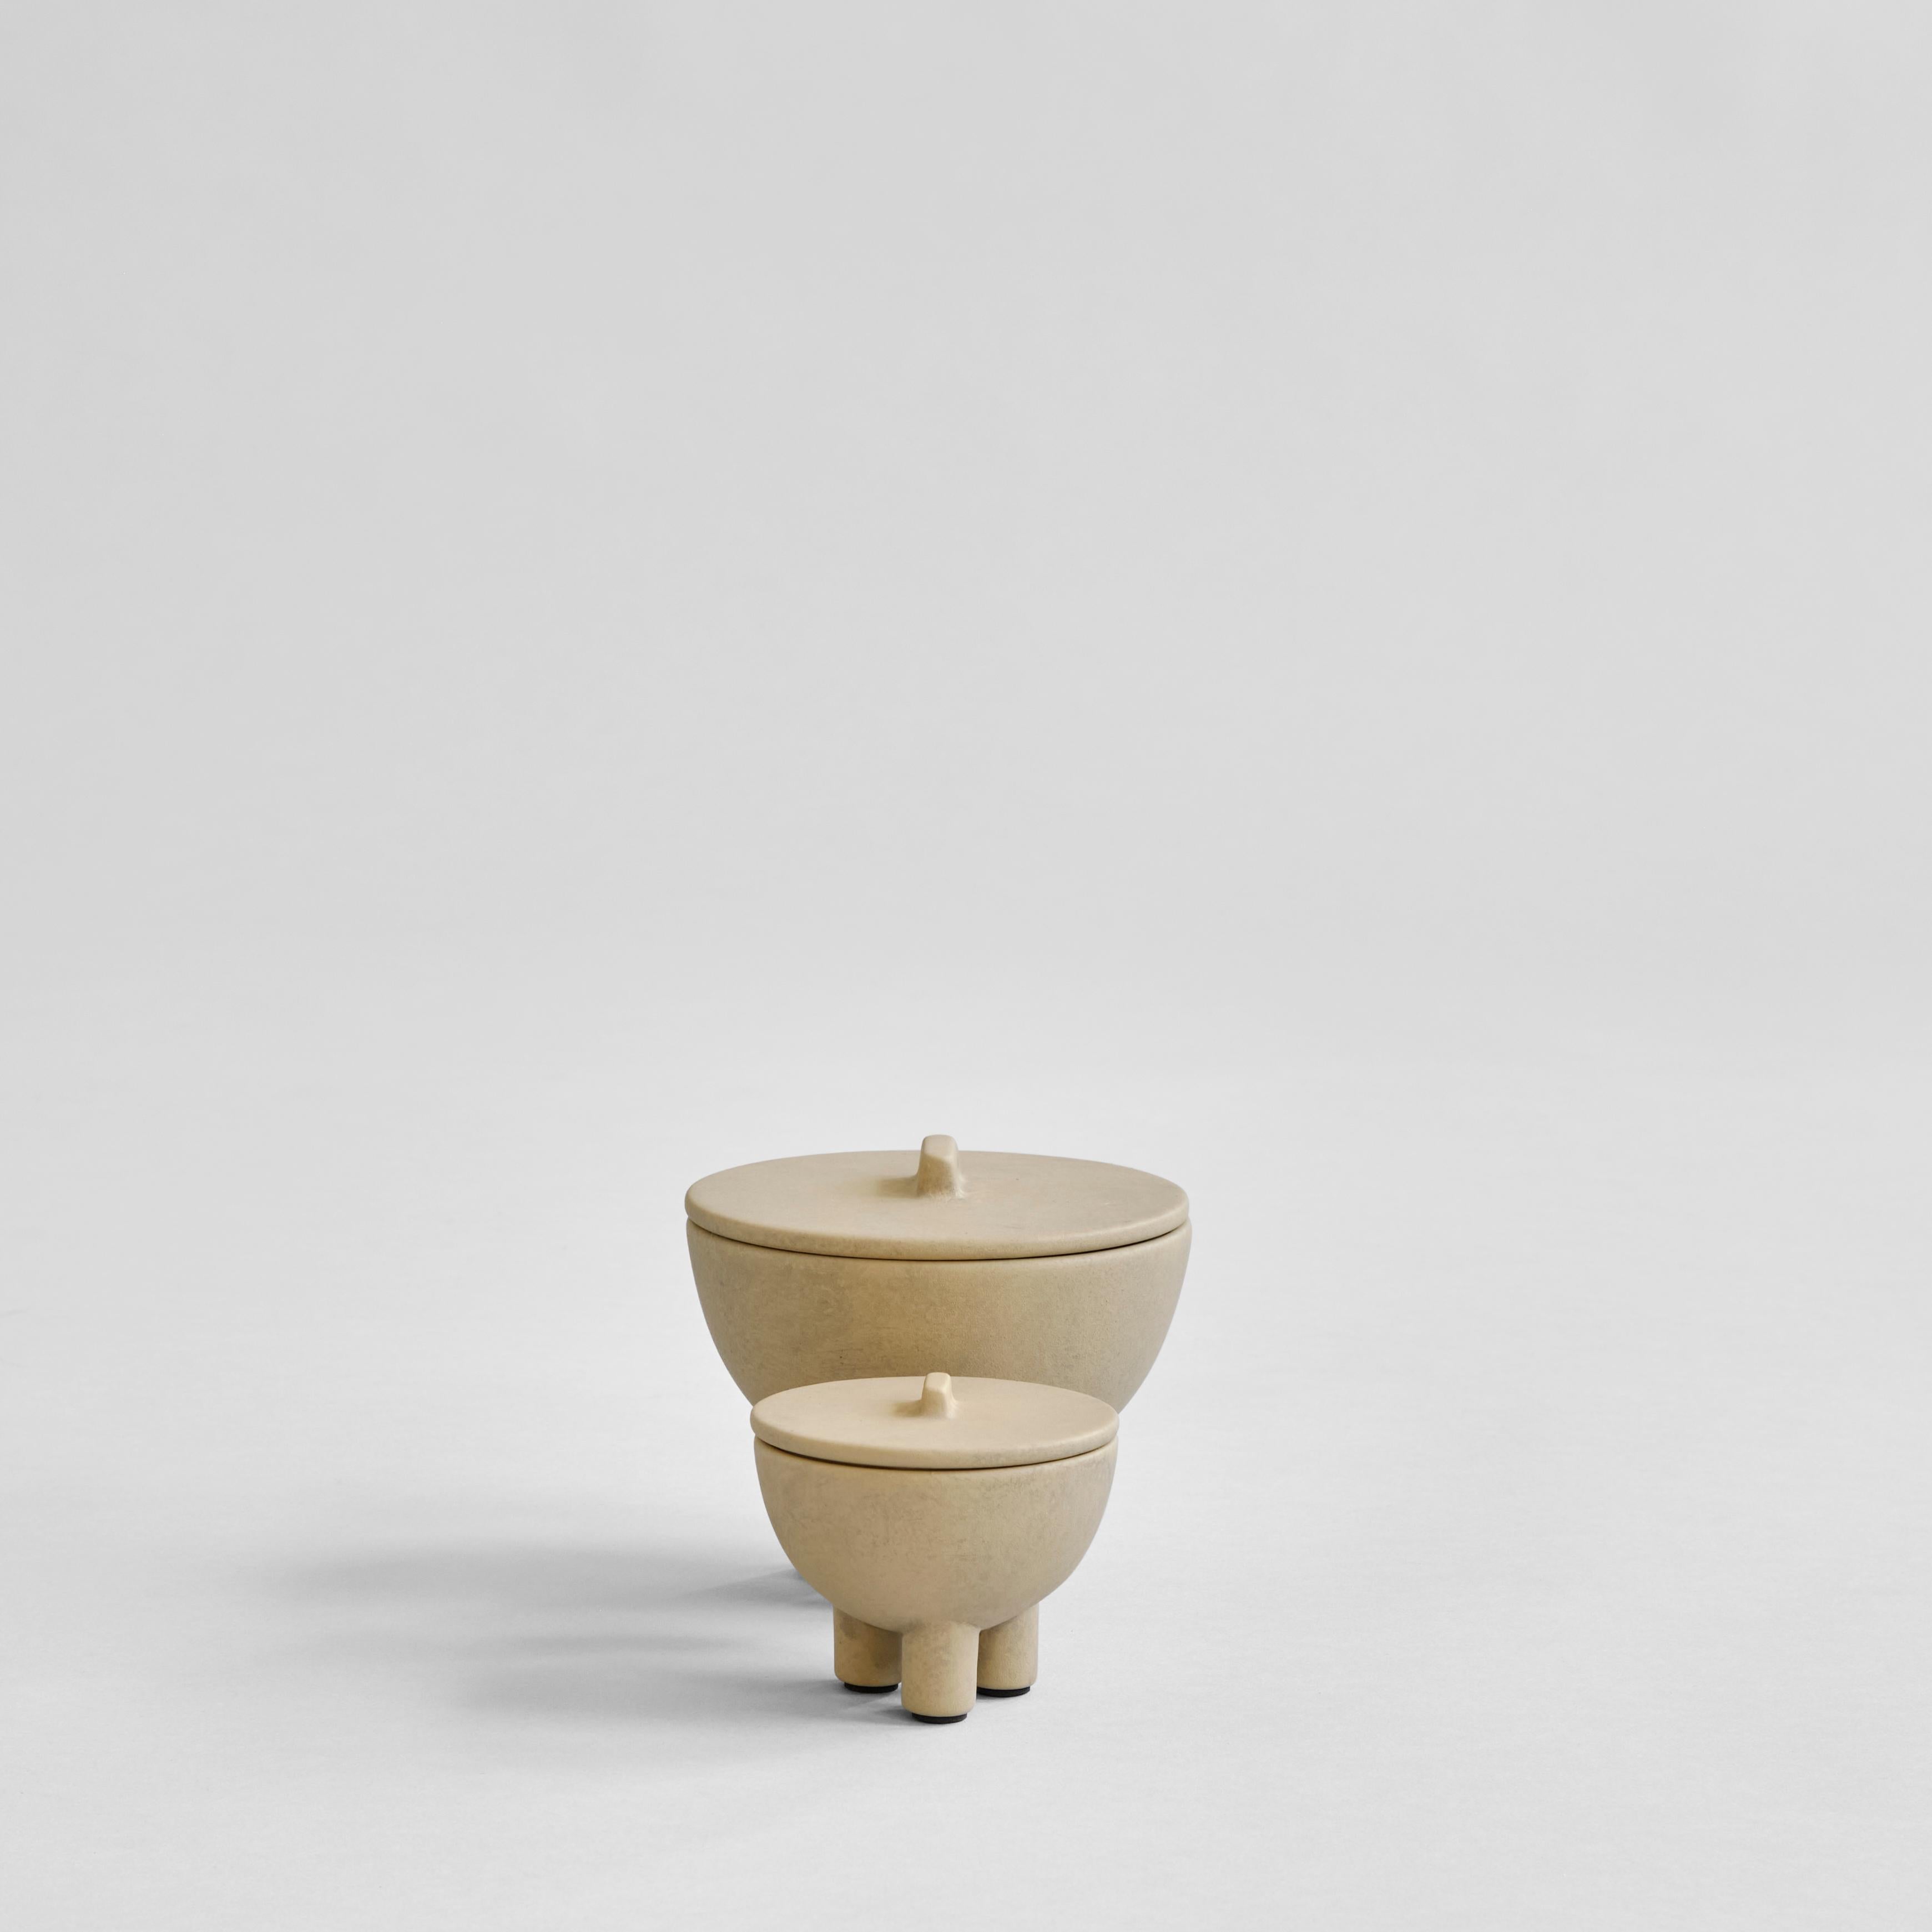 A set of 4 sand duck Jar Medio by 101 Copenhagen
Designed by Kristian Sofus Hansen & Tommy Hyldahl
Dimensions: L12 / W12 / H9,5 CM
Materials: Ceramic

Reminiscent of little, individual three-legged characters or friendly creatures, the Duck